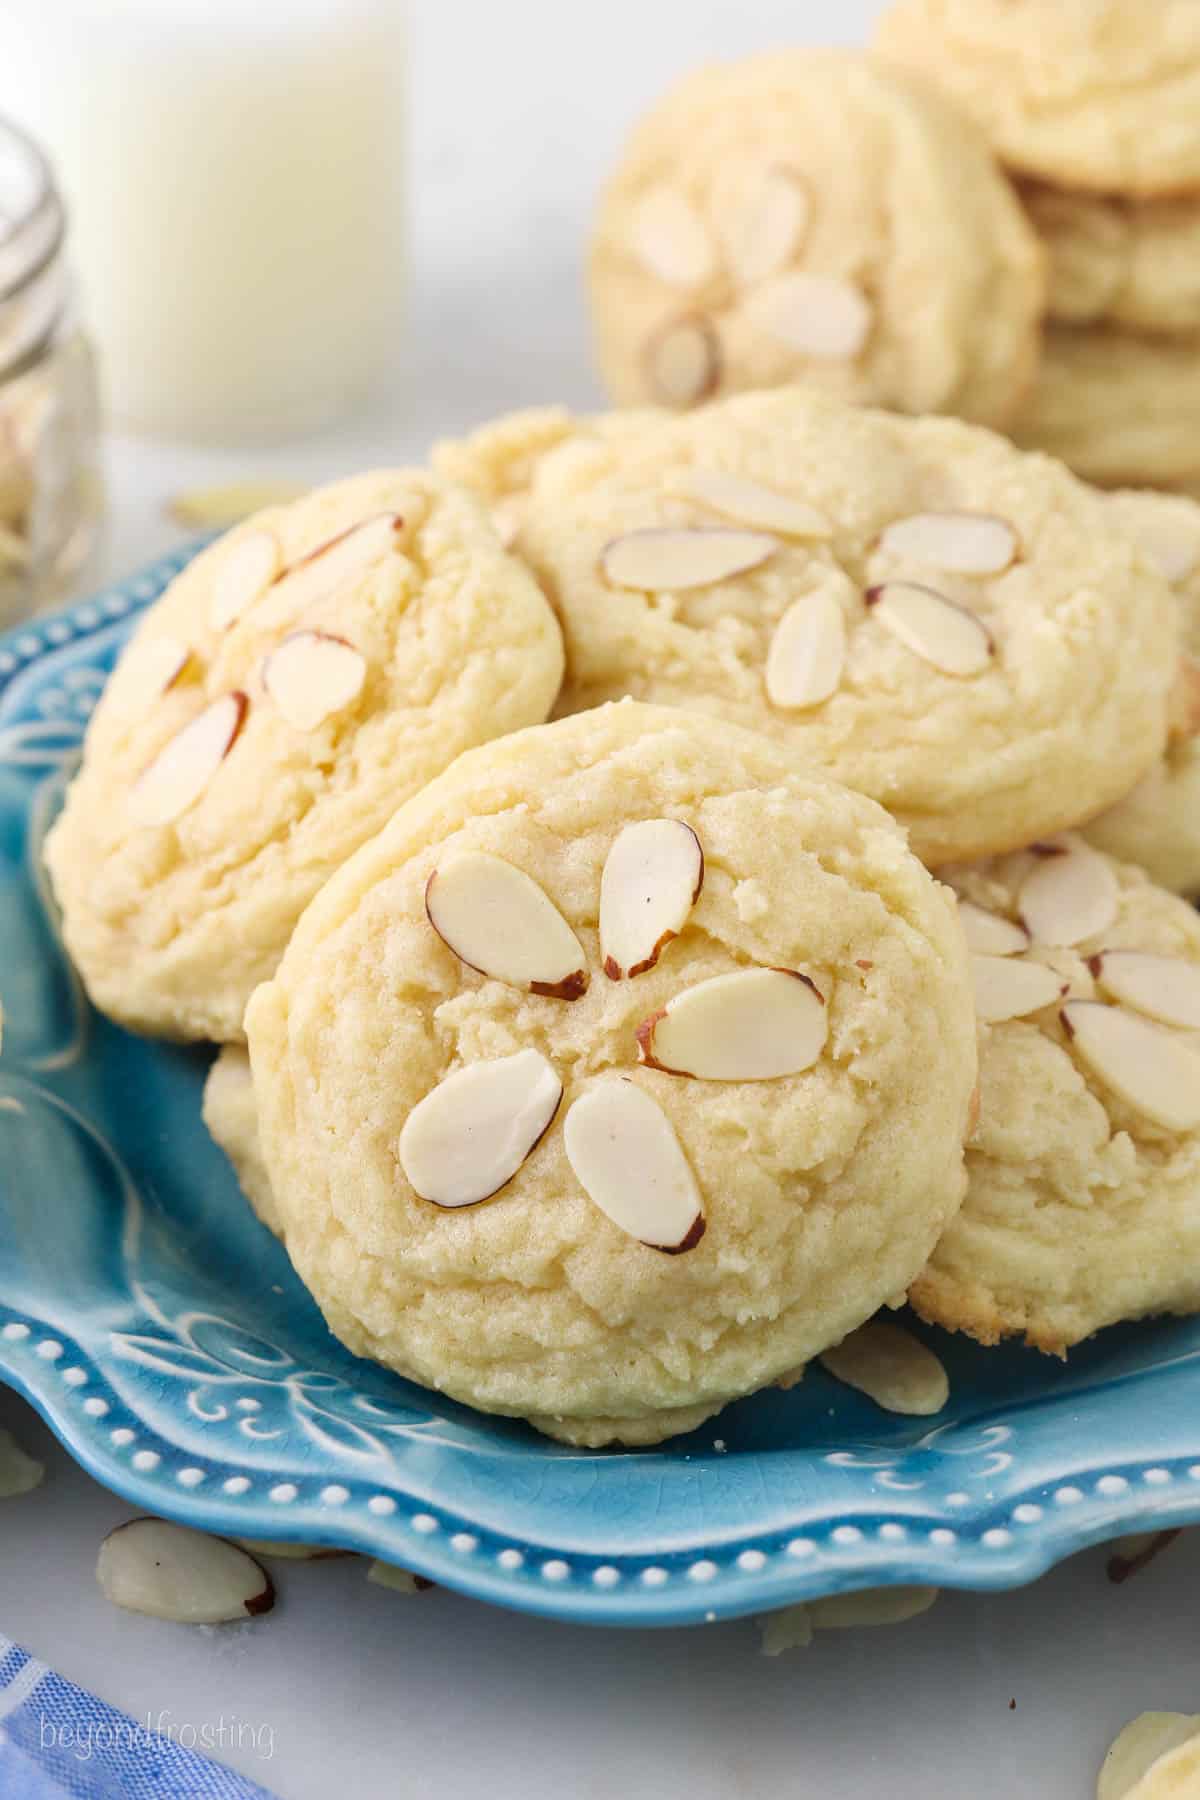 A pile of almond cookies on a blue plate with a glass of milk in the background.